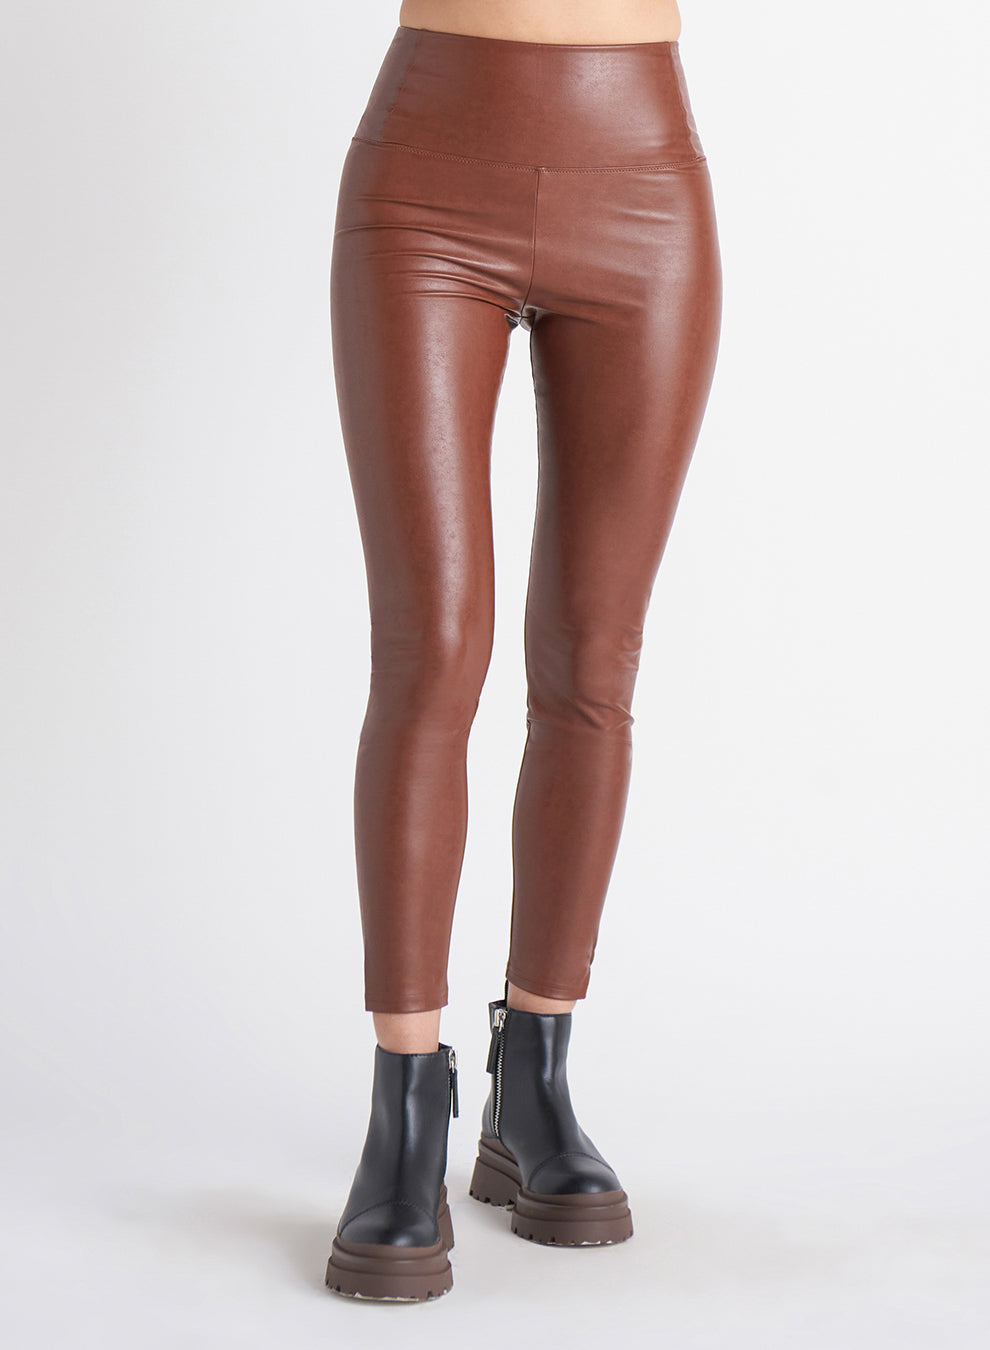 adviicd Spanx Leather Leggings For Women Women's High Waist Leather Pants  PU Leather Pants Brown M 